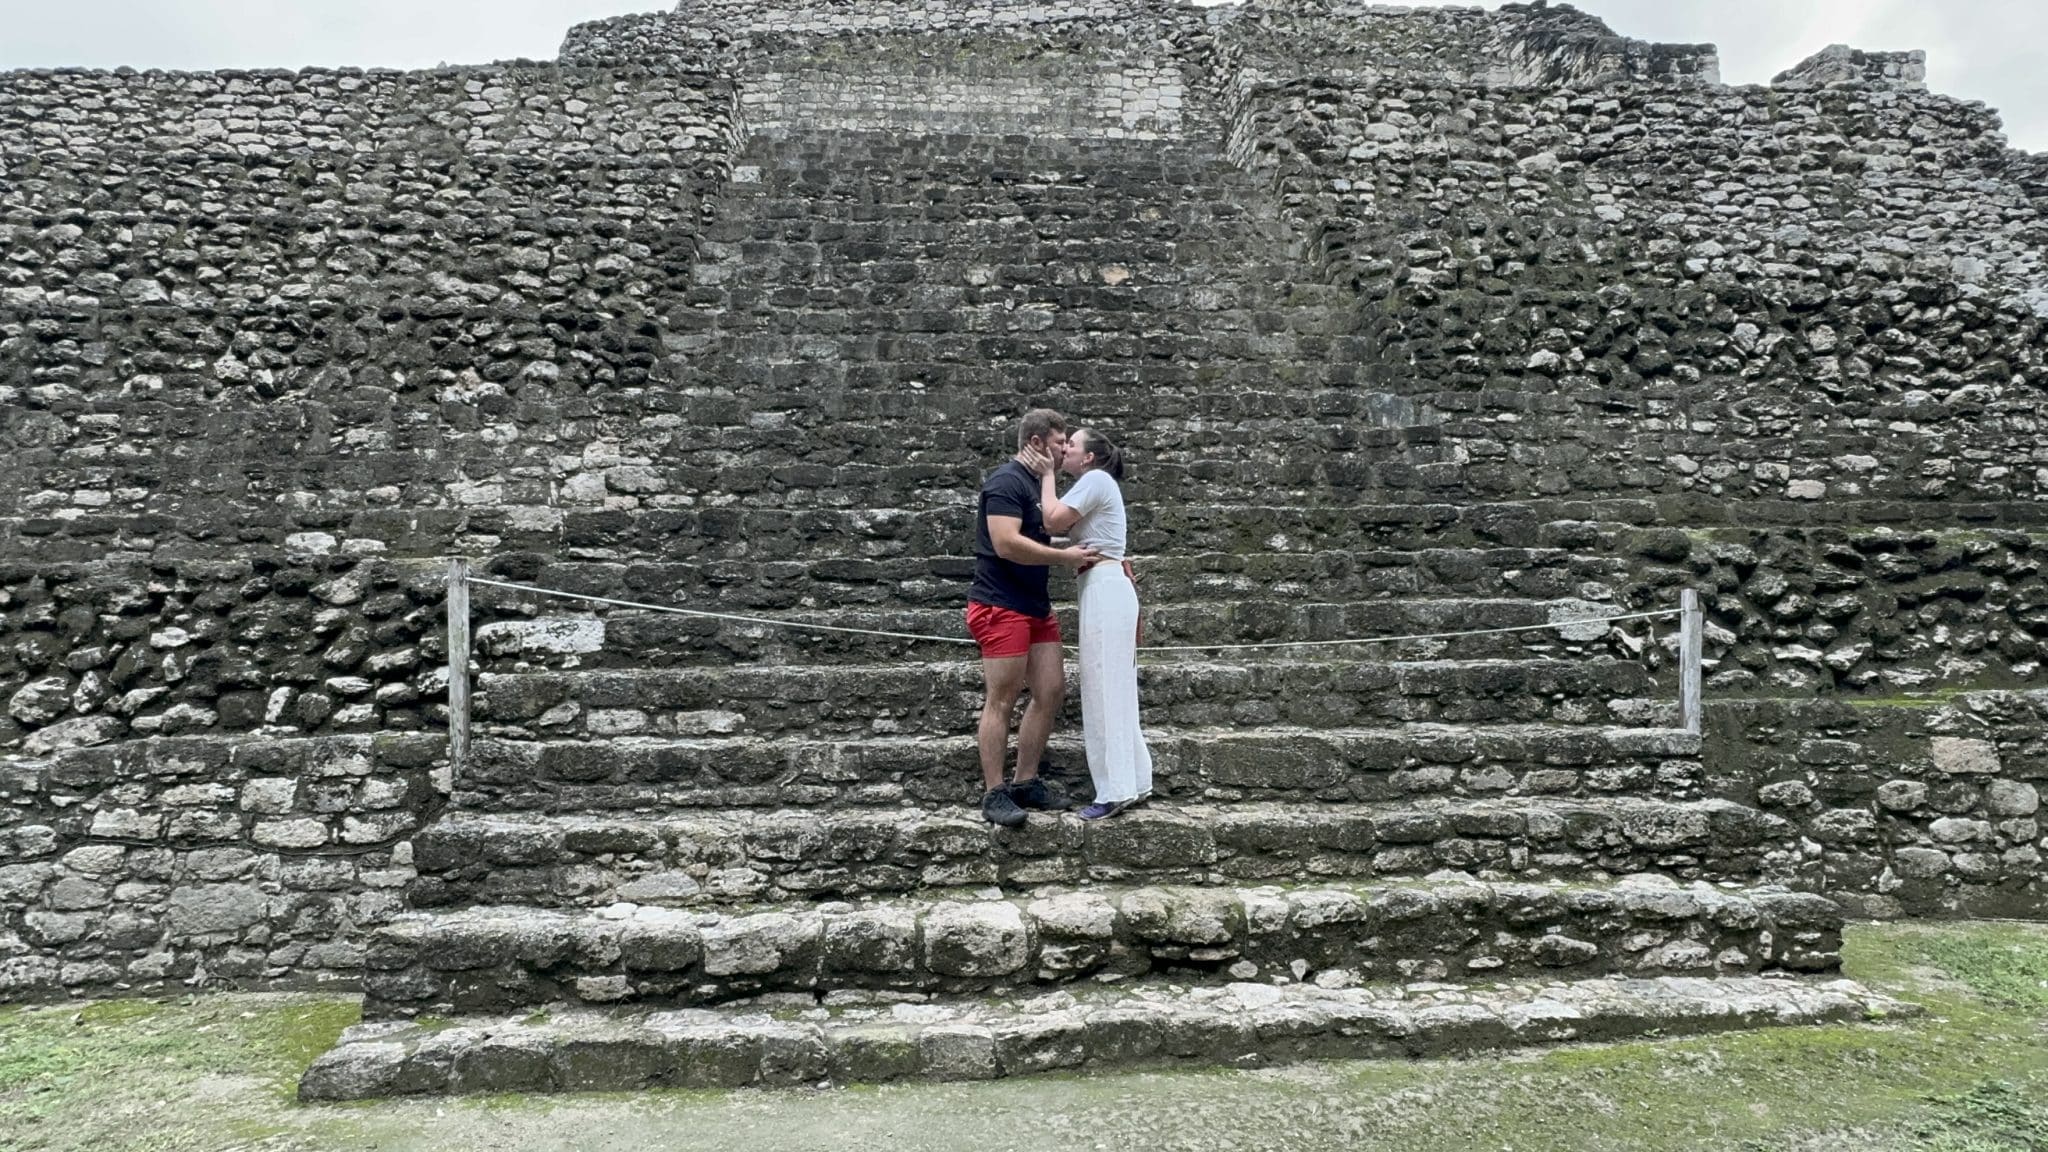 mayan ruins marriage proposal with man and woman